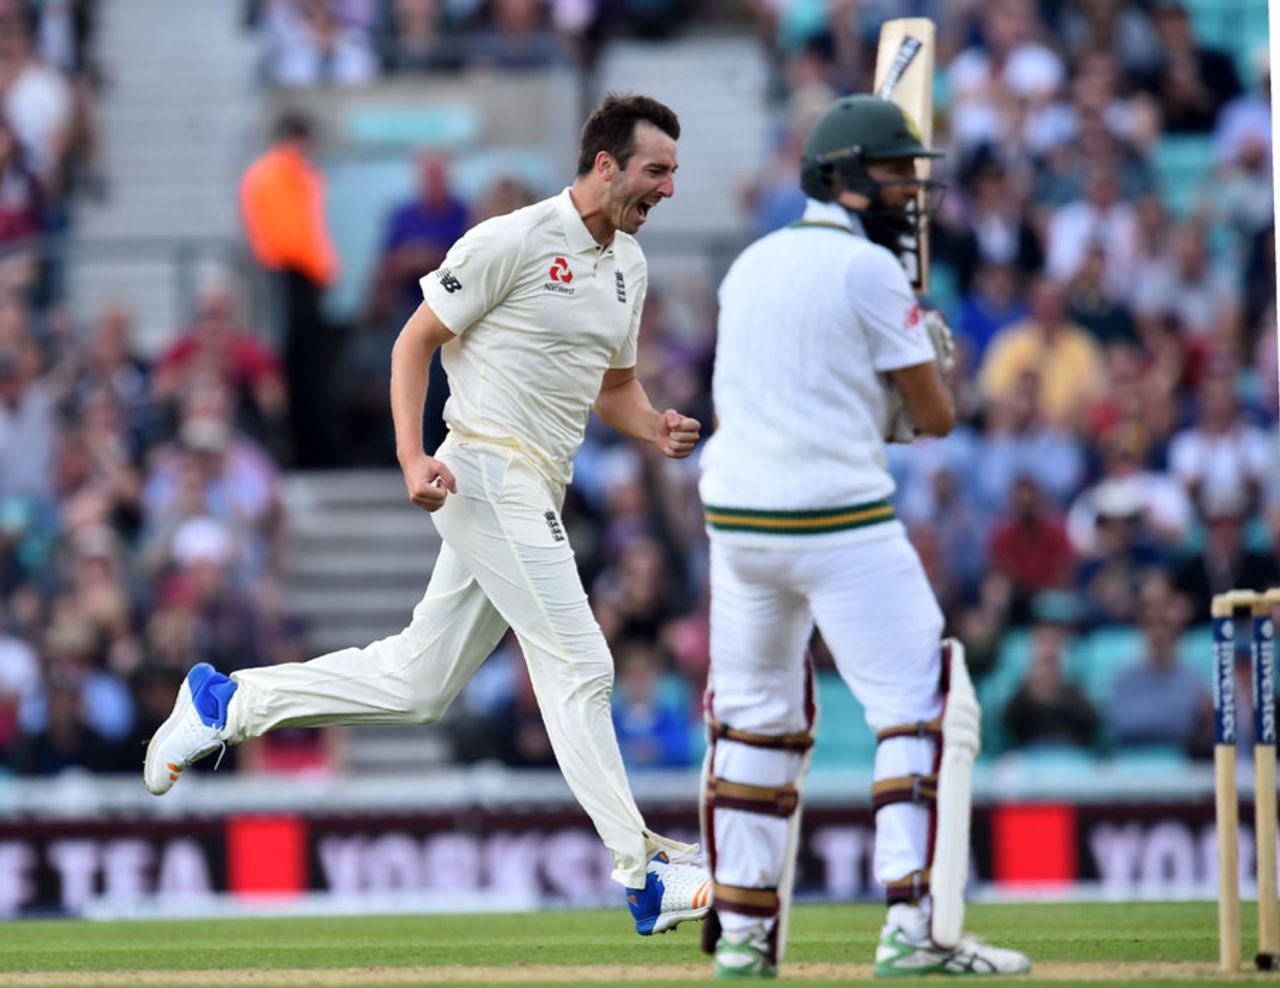 Toby Roland-Jones screams in delight after dismissing Hashim Amla for the second time on his Test debut, England v South Africa, 3rd Investec Test, The Oval, 4th day, July 30, 2017 